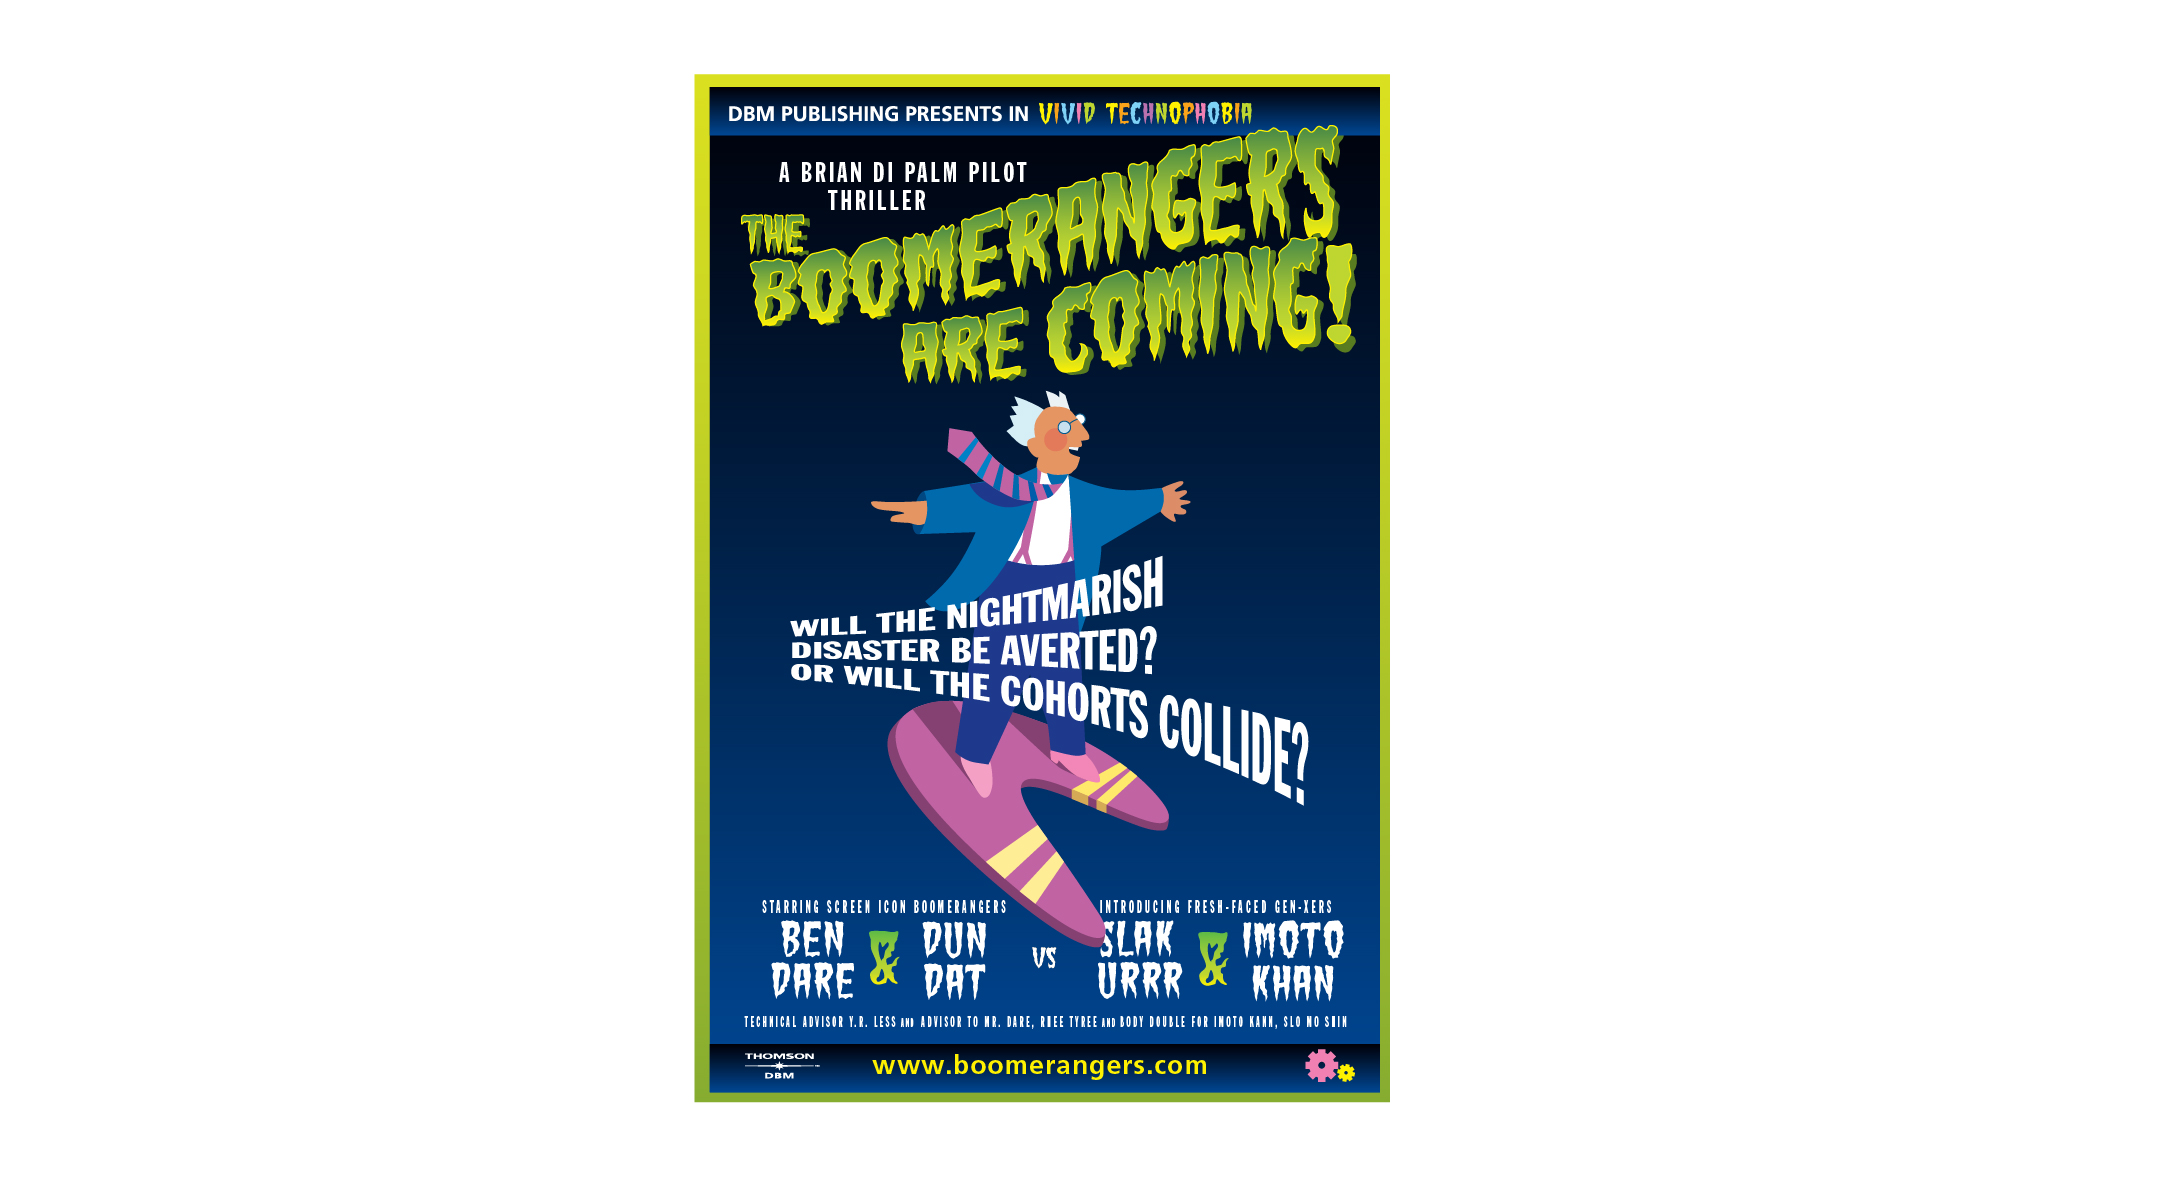 Poster design and illustration for Boomerangers, published by DBM/Thompson.